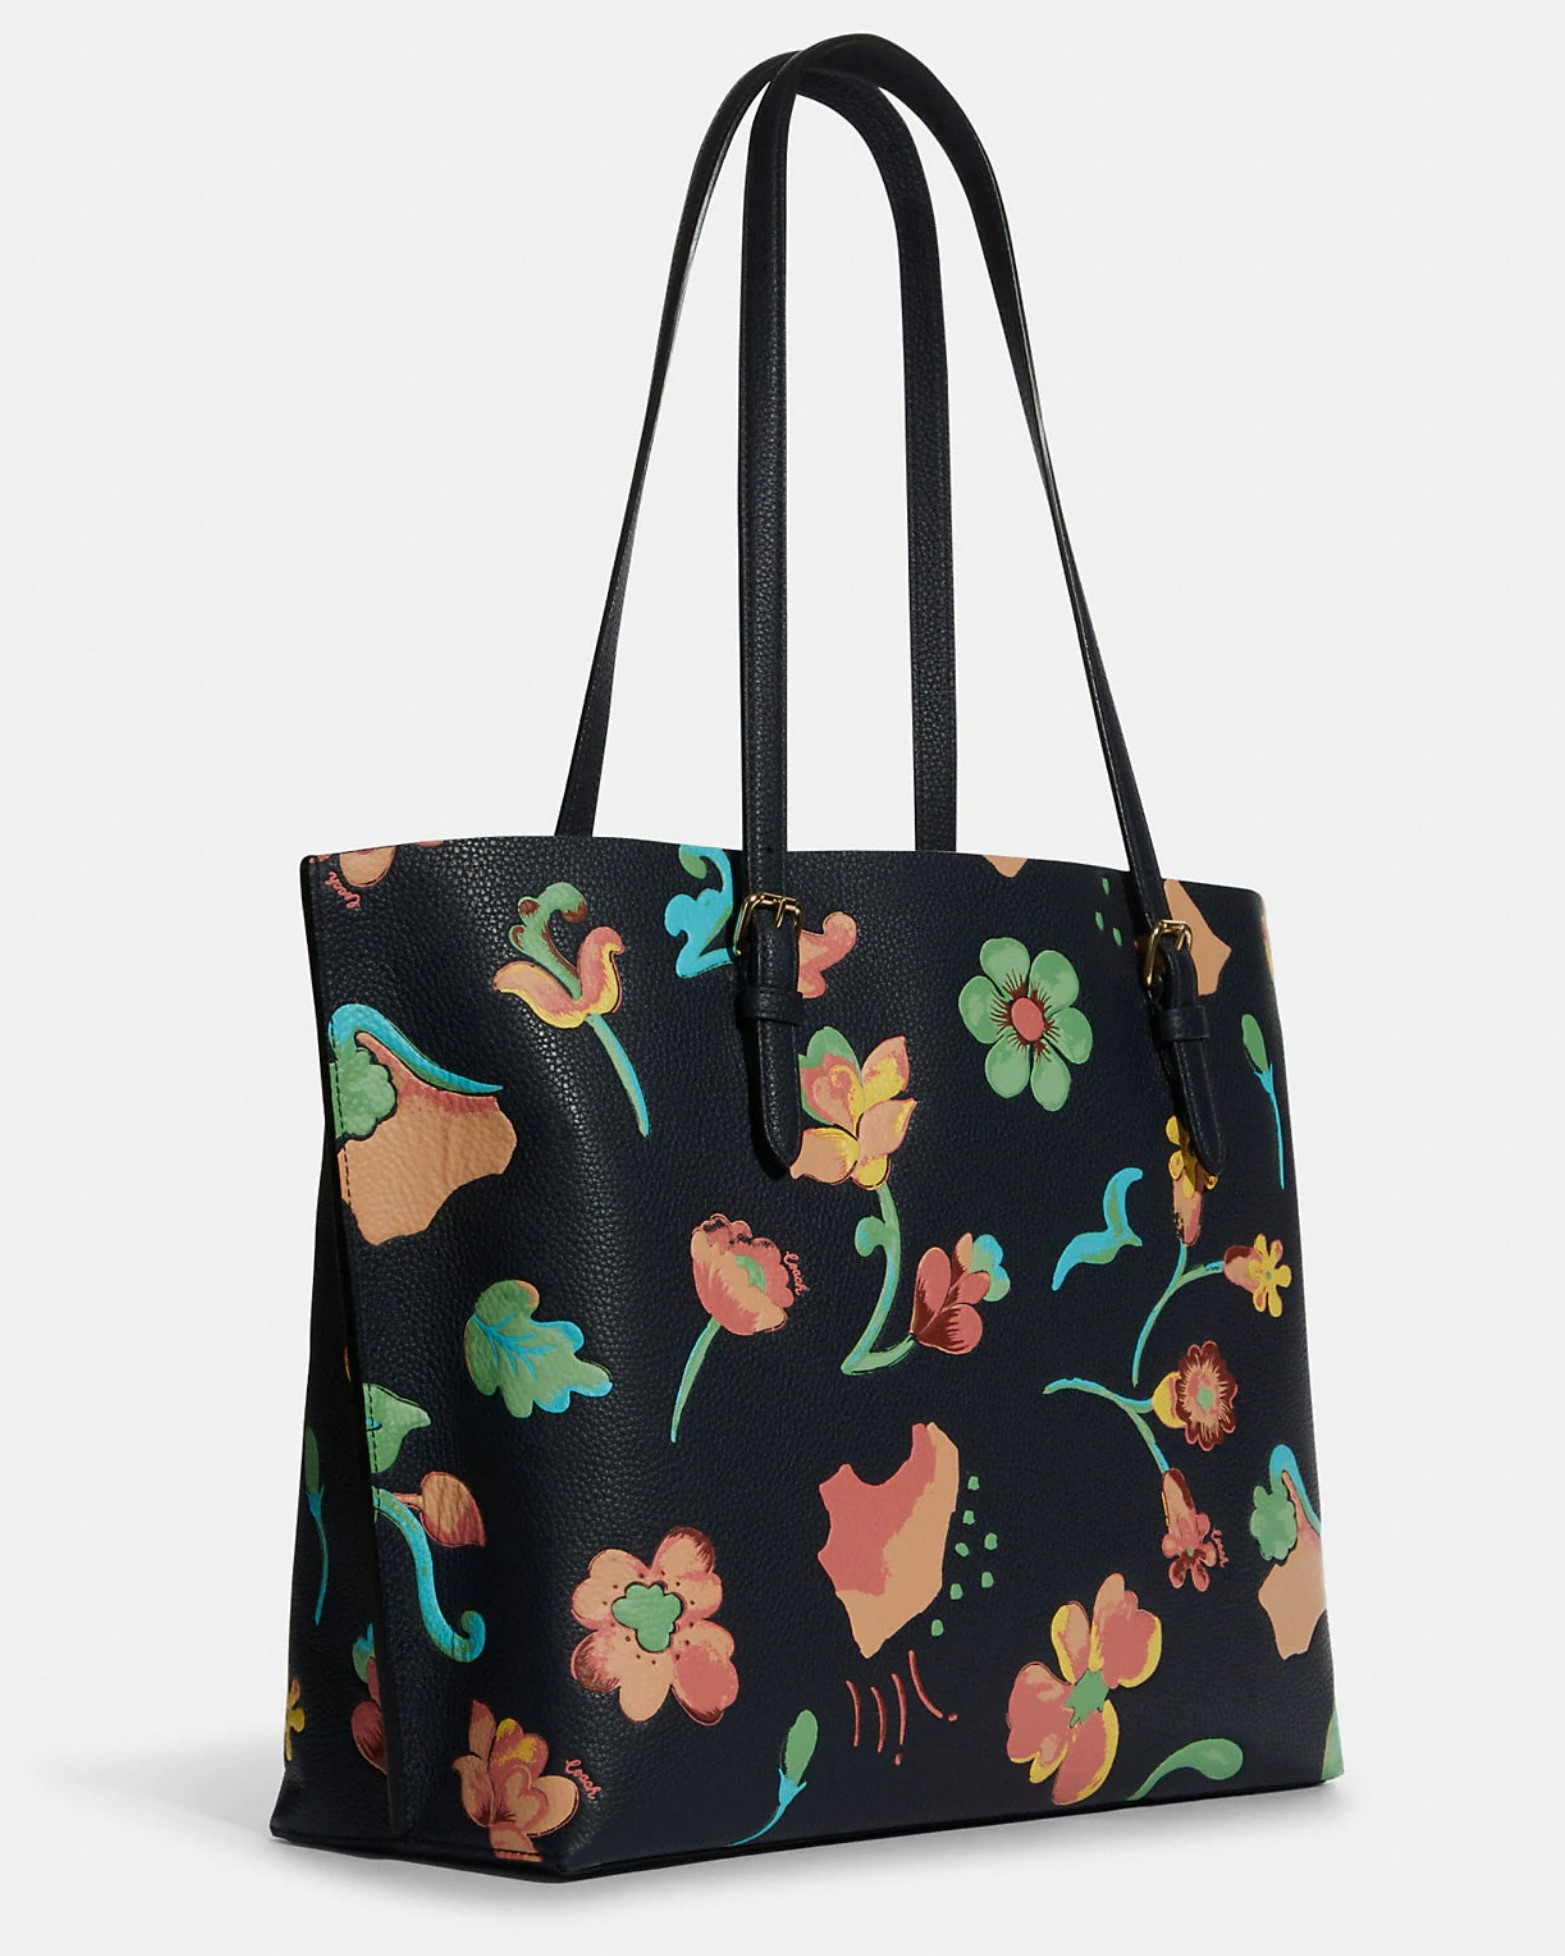 TÚI COACH MOLLIE TOTE WITH DREAMY LAND FLORAL PRINT 4